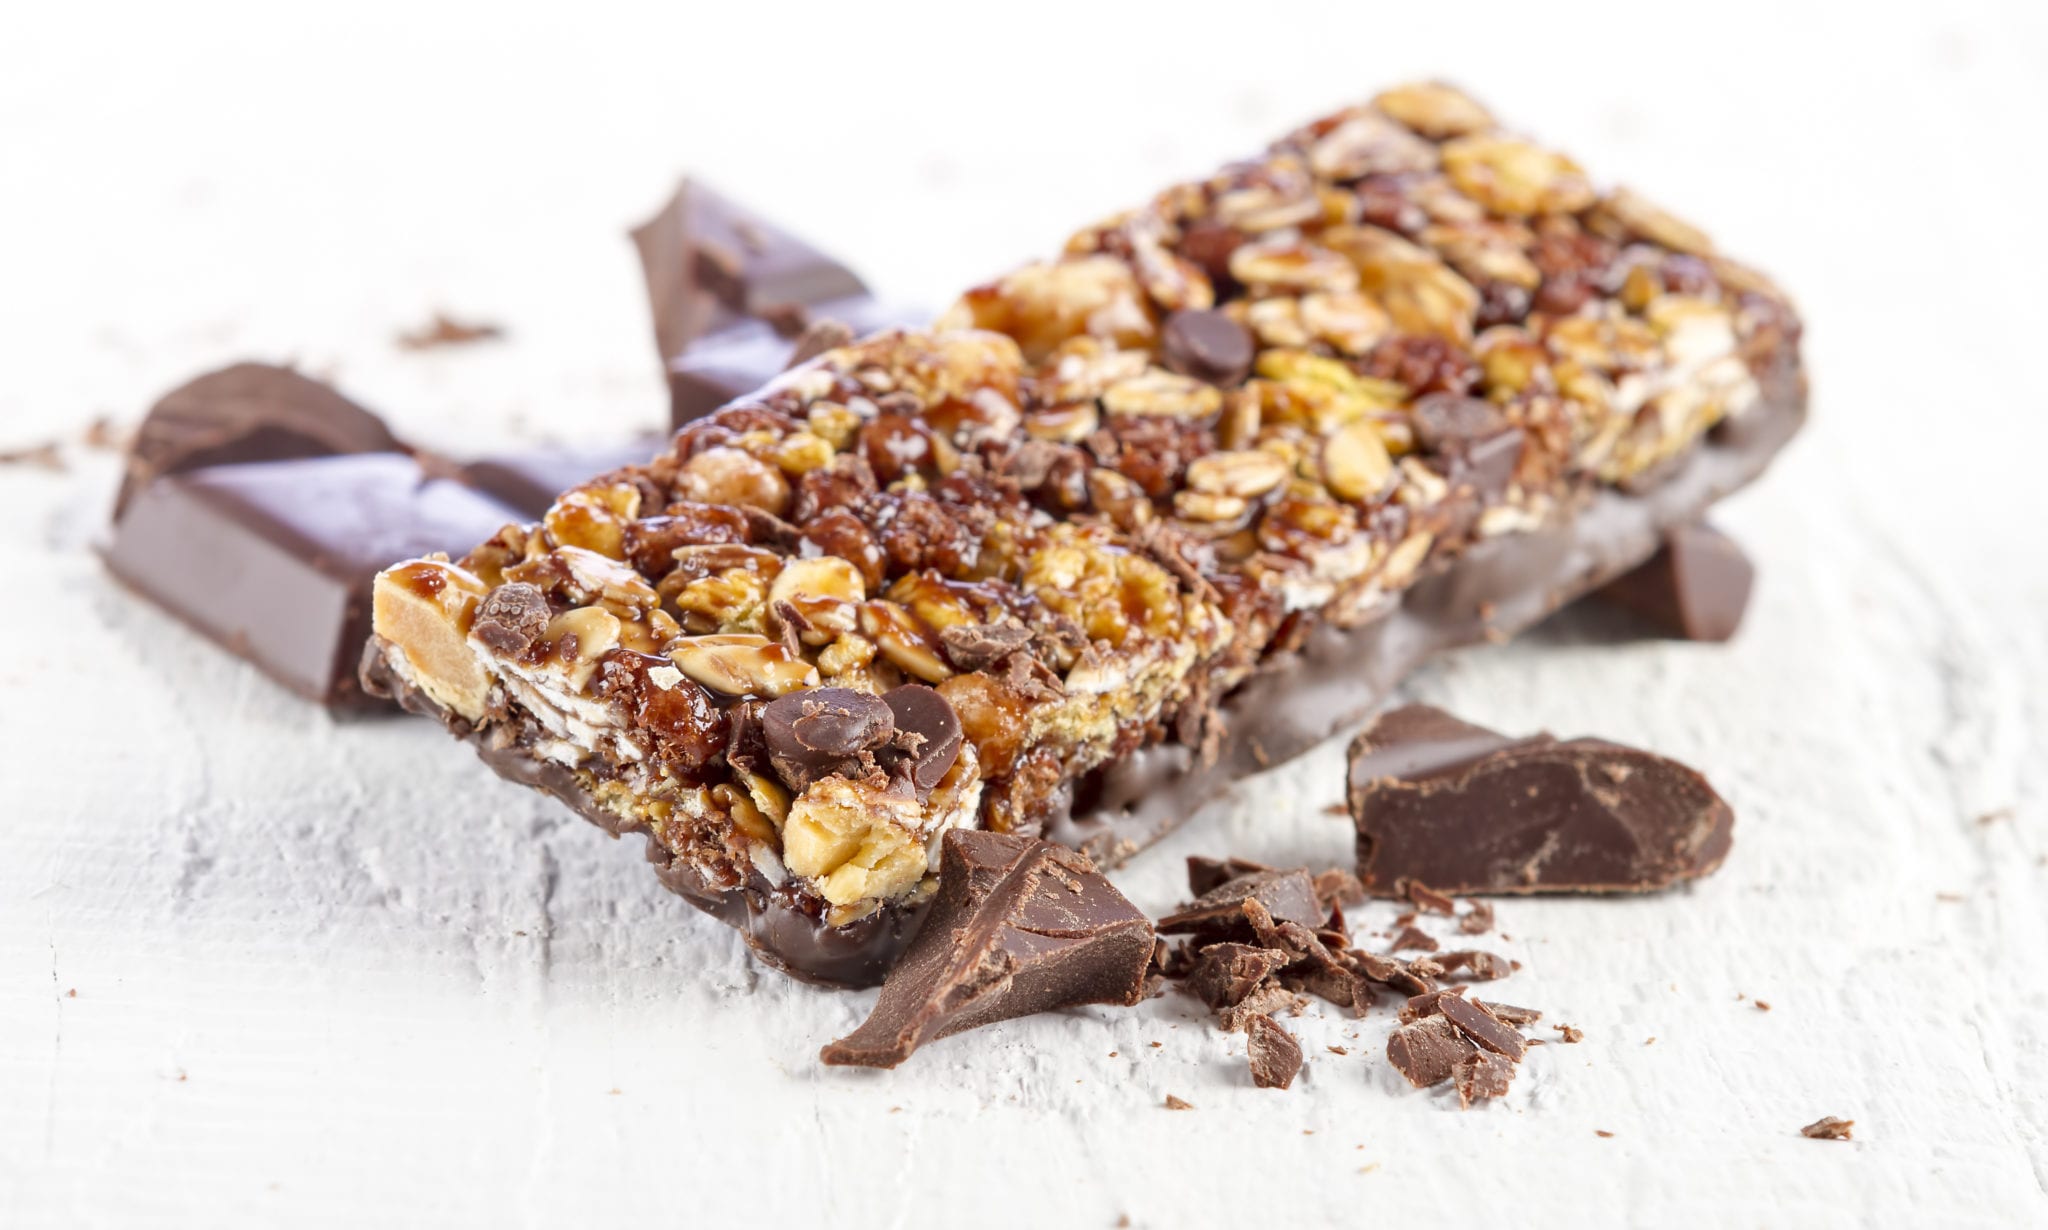 granola bar with chocolate on white wooden background